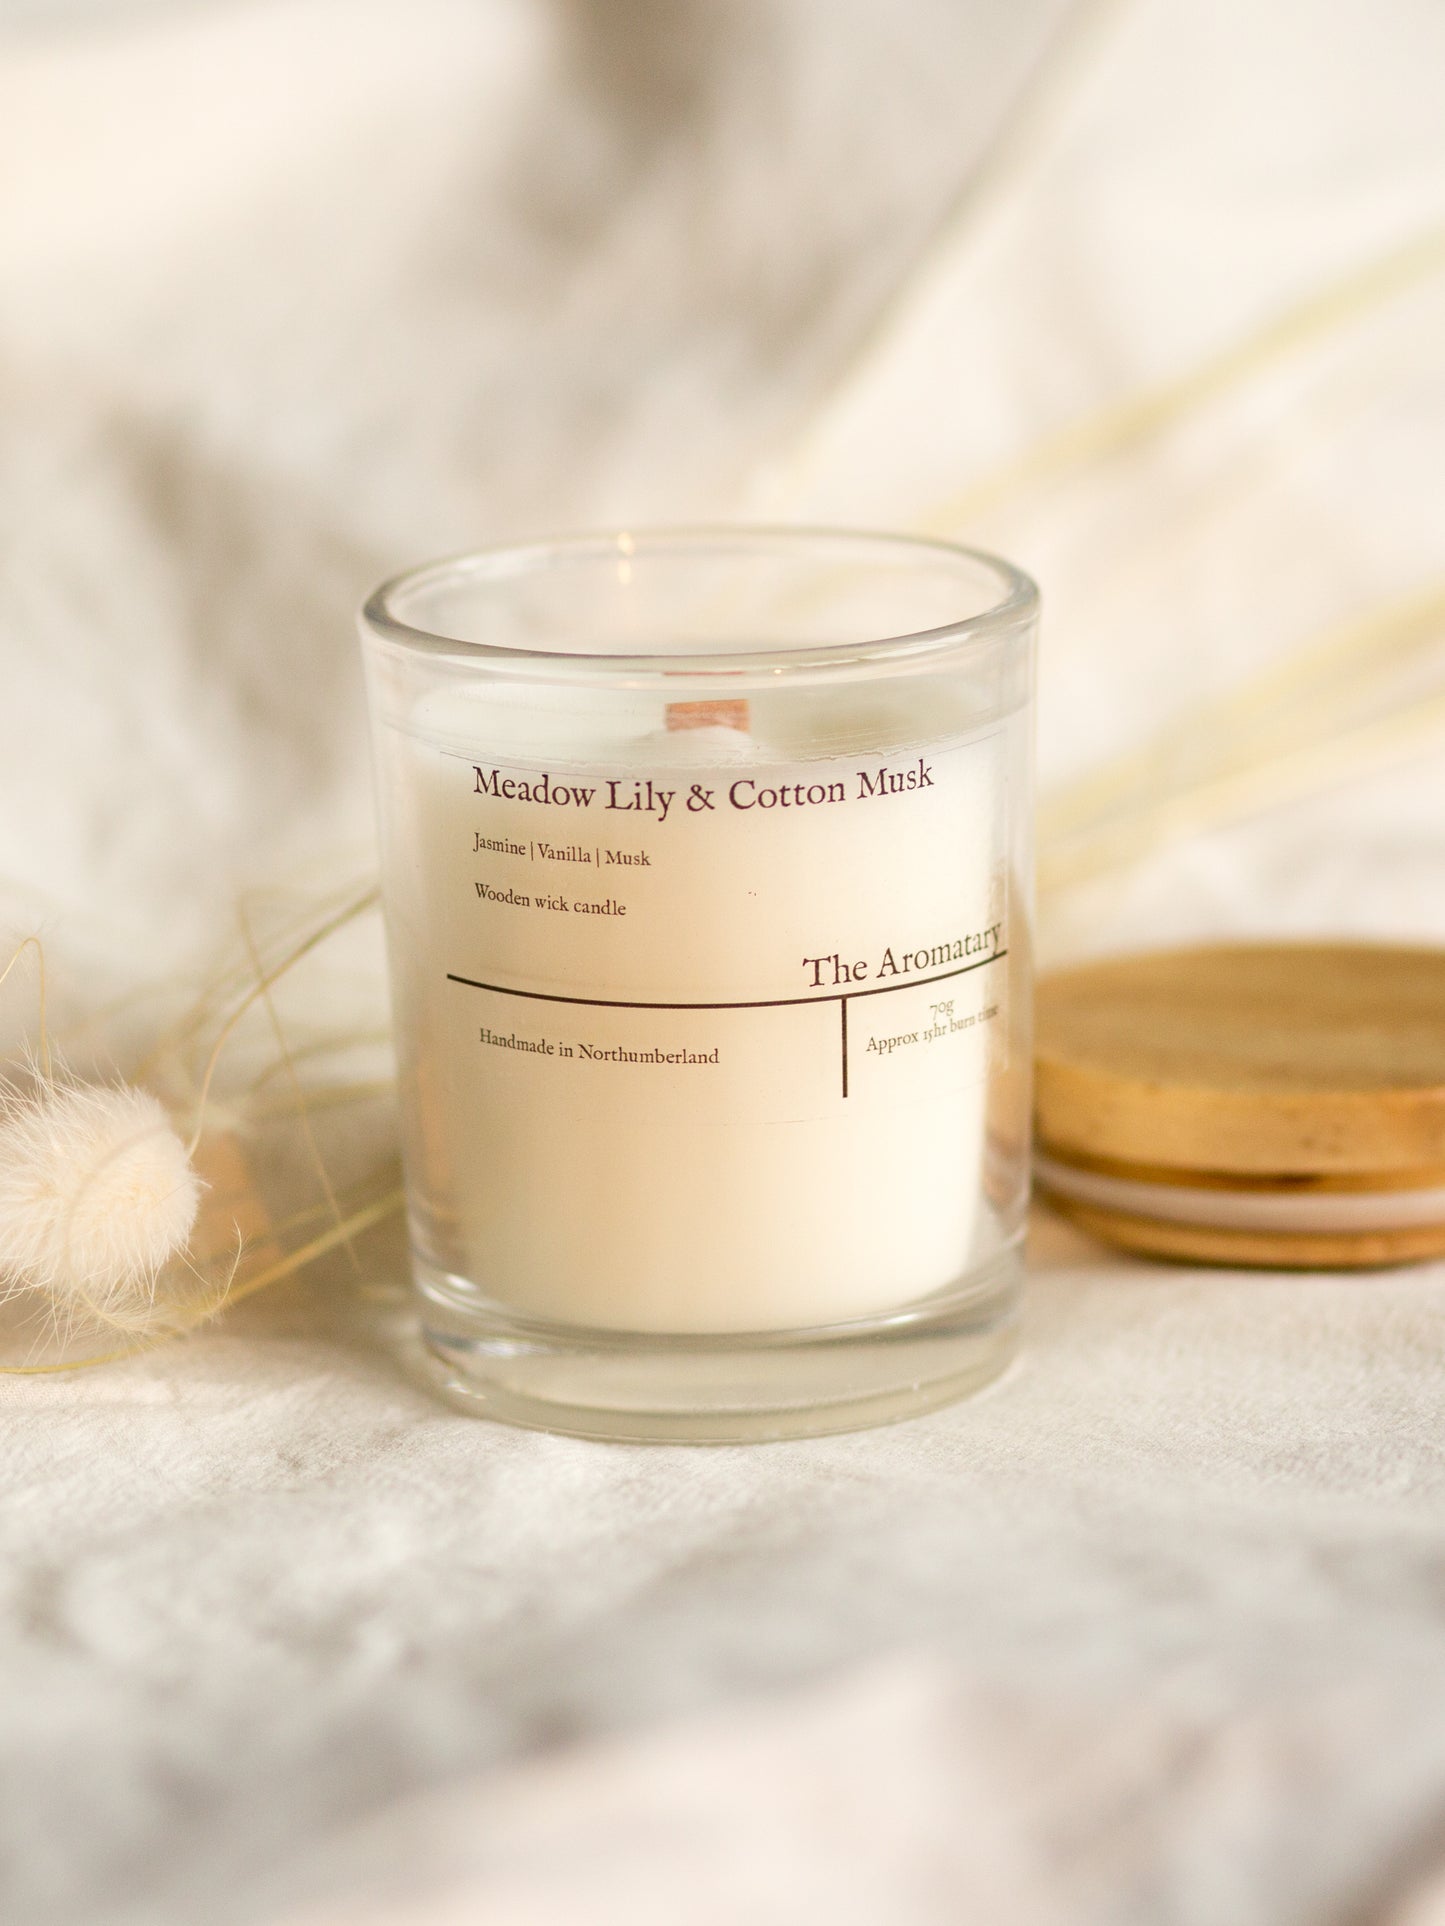 Meadow Lilly and Cotton Musk wooden wick votive